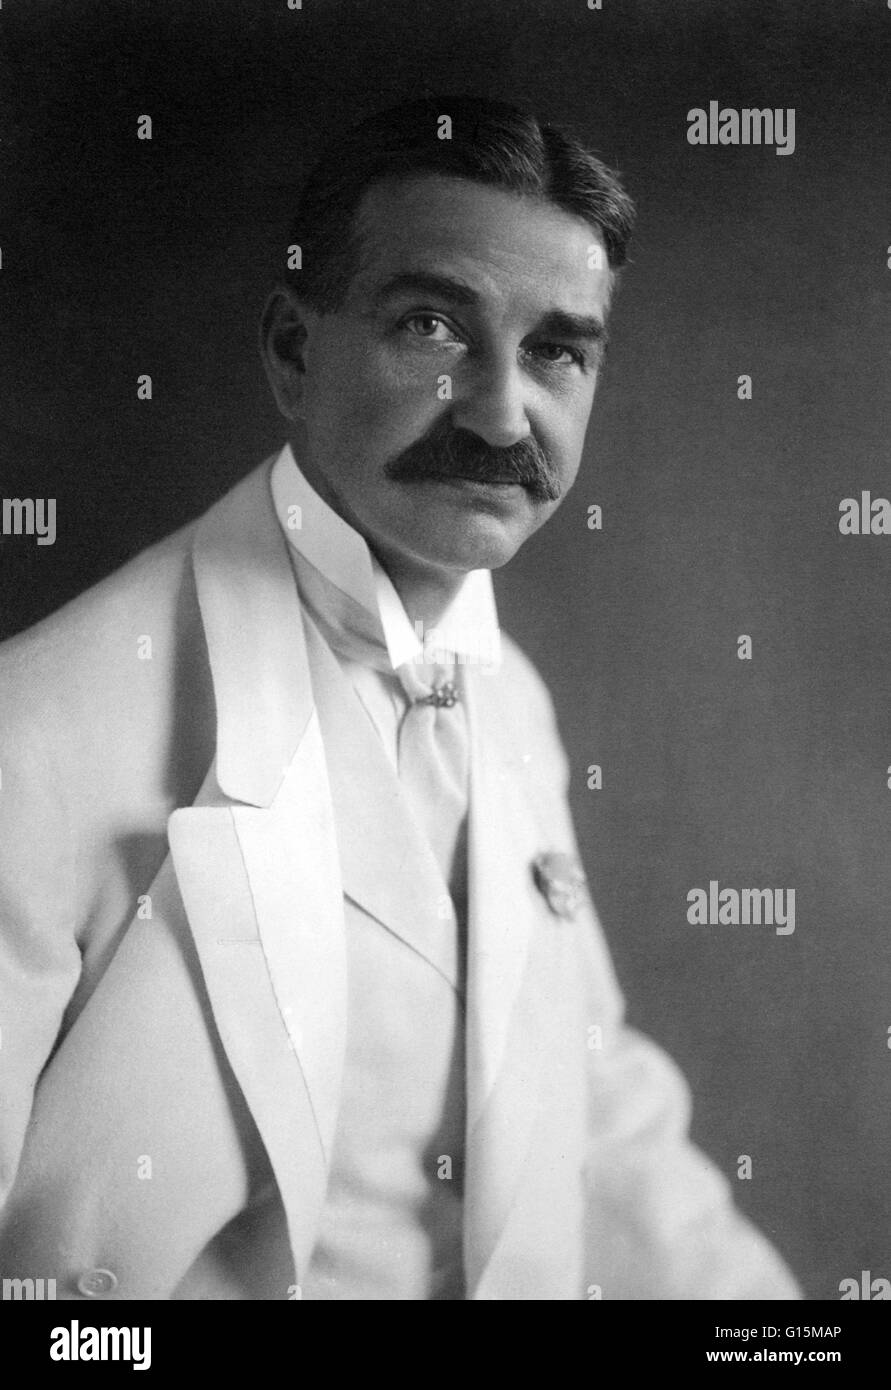 Lyman Frank Baum (1856-1919) was an American author of children's books, best known for writing The Wonderful Wizard of Oz. He wrote thirteen novel sequels, nine other fantasy novels, and a host of other works and made numerous attempts to bring his works Stock Photo